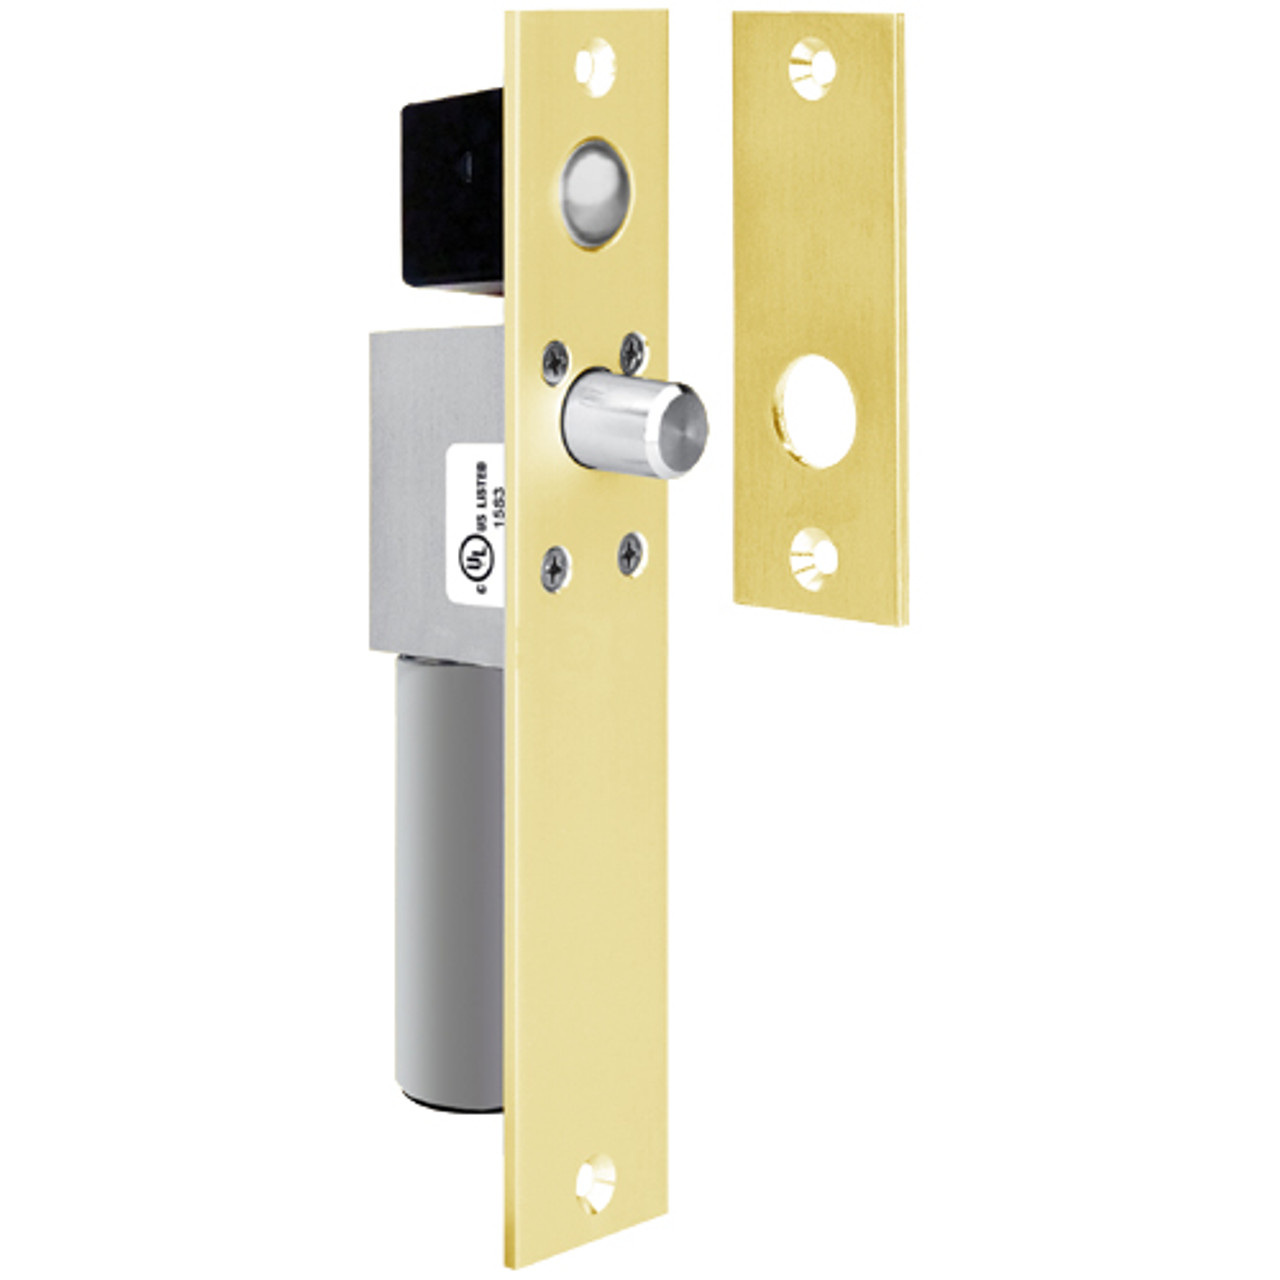 1291AHCD SDC Failsecure Spacesaver Mortise Bolt Lock with Door Position Sensor in Bright Brass